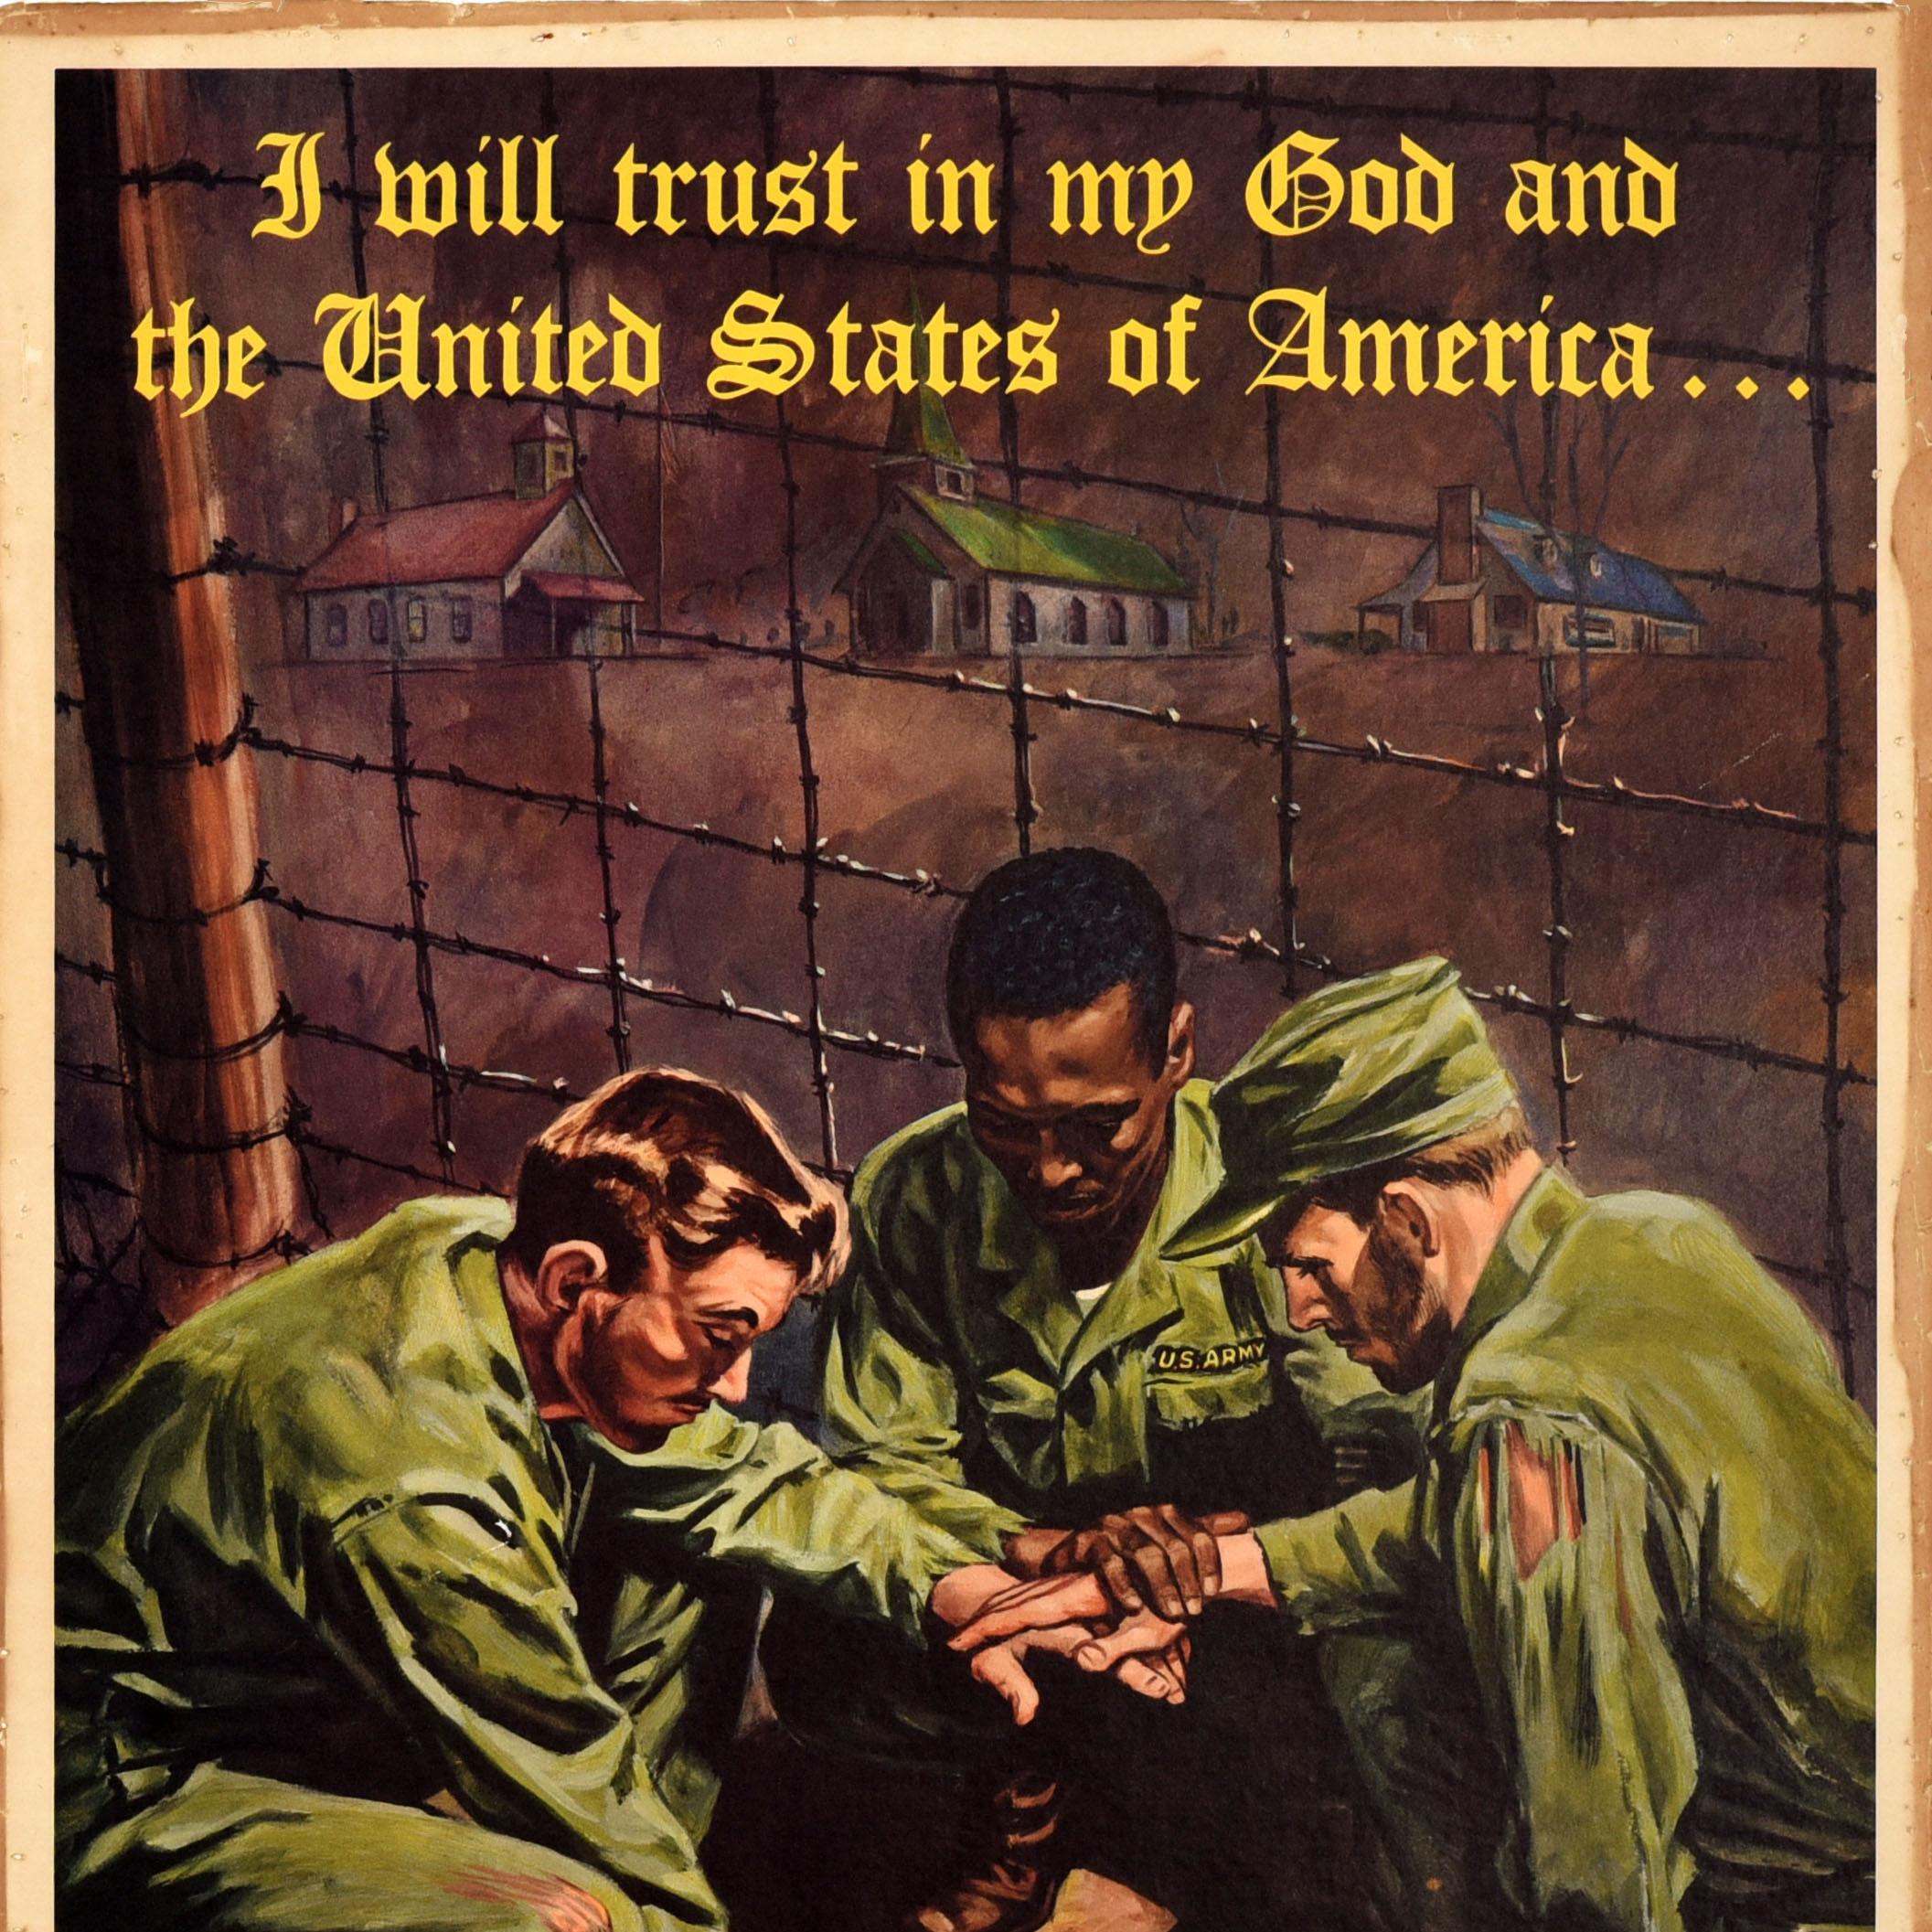 American Scarce Original Vintage Military Propaganda Poster Multiracial POW WWII US Army For Sale